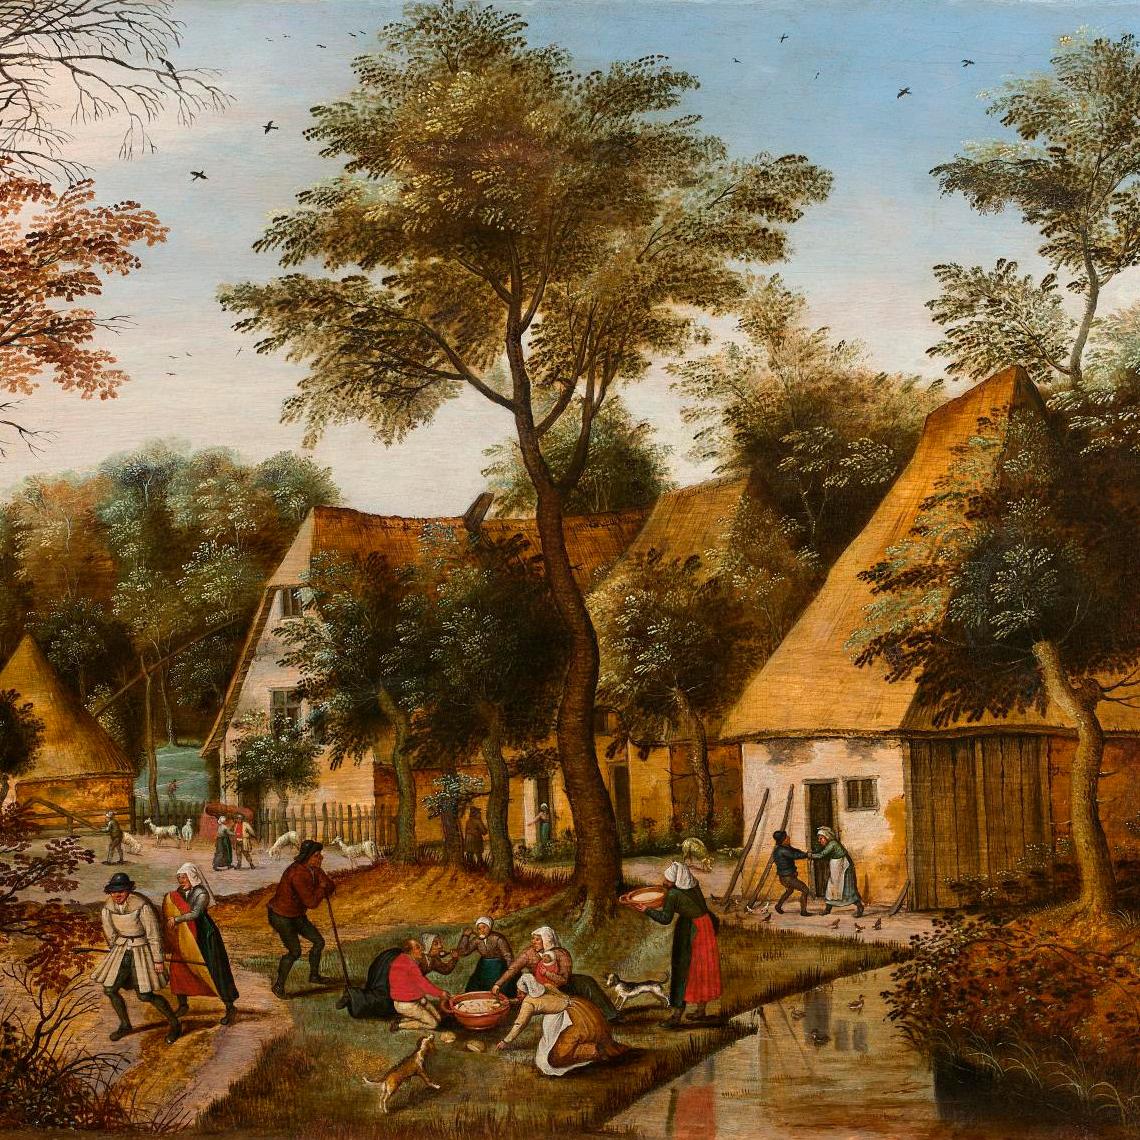 Bruegel the Younger’s 